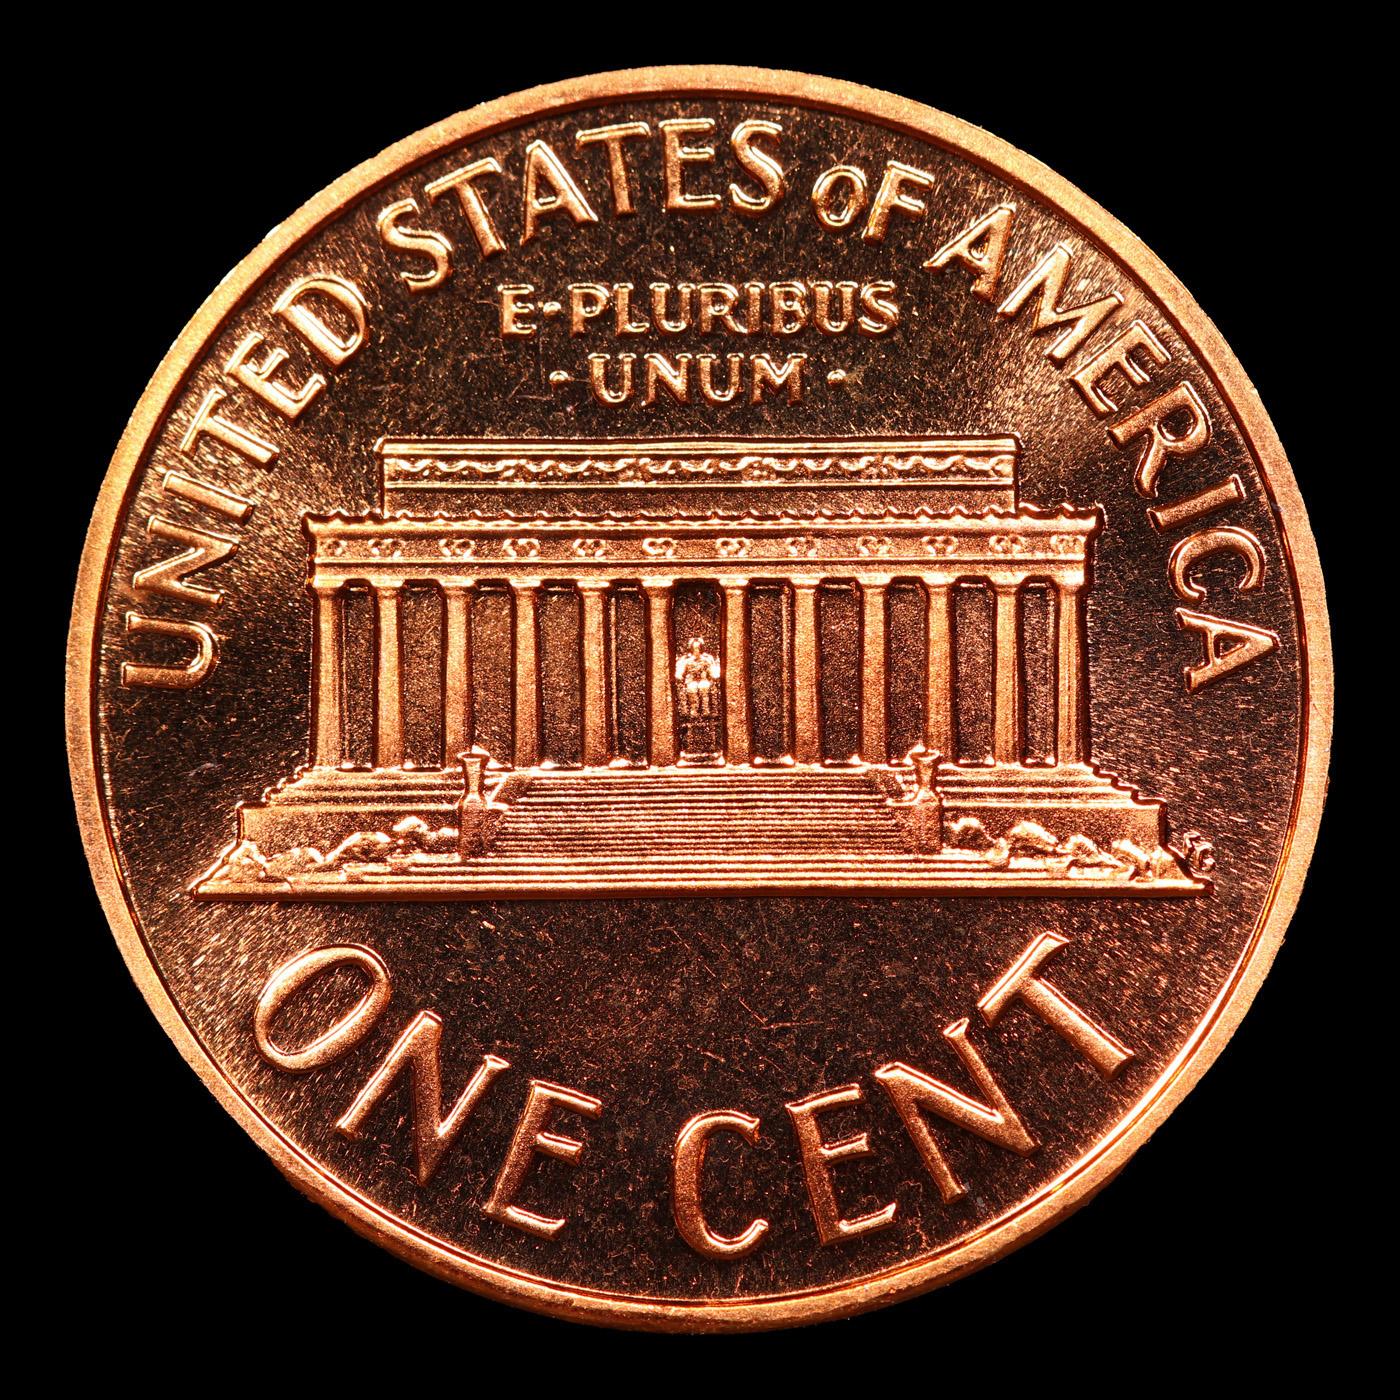 Proof 1964 Lincoln Cent TOP POP! 1c Graded pr69 rd cam BY SEGS